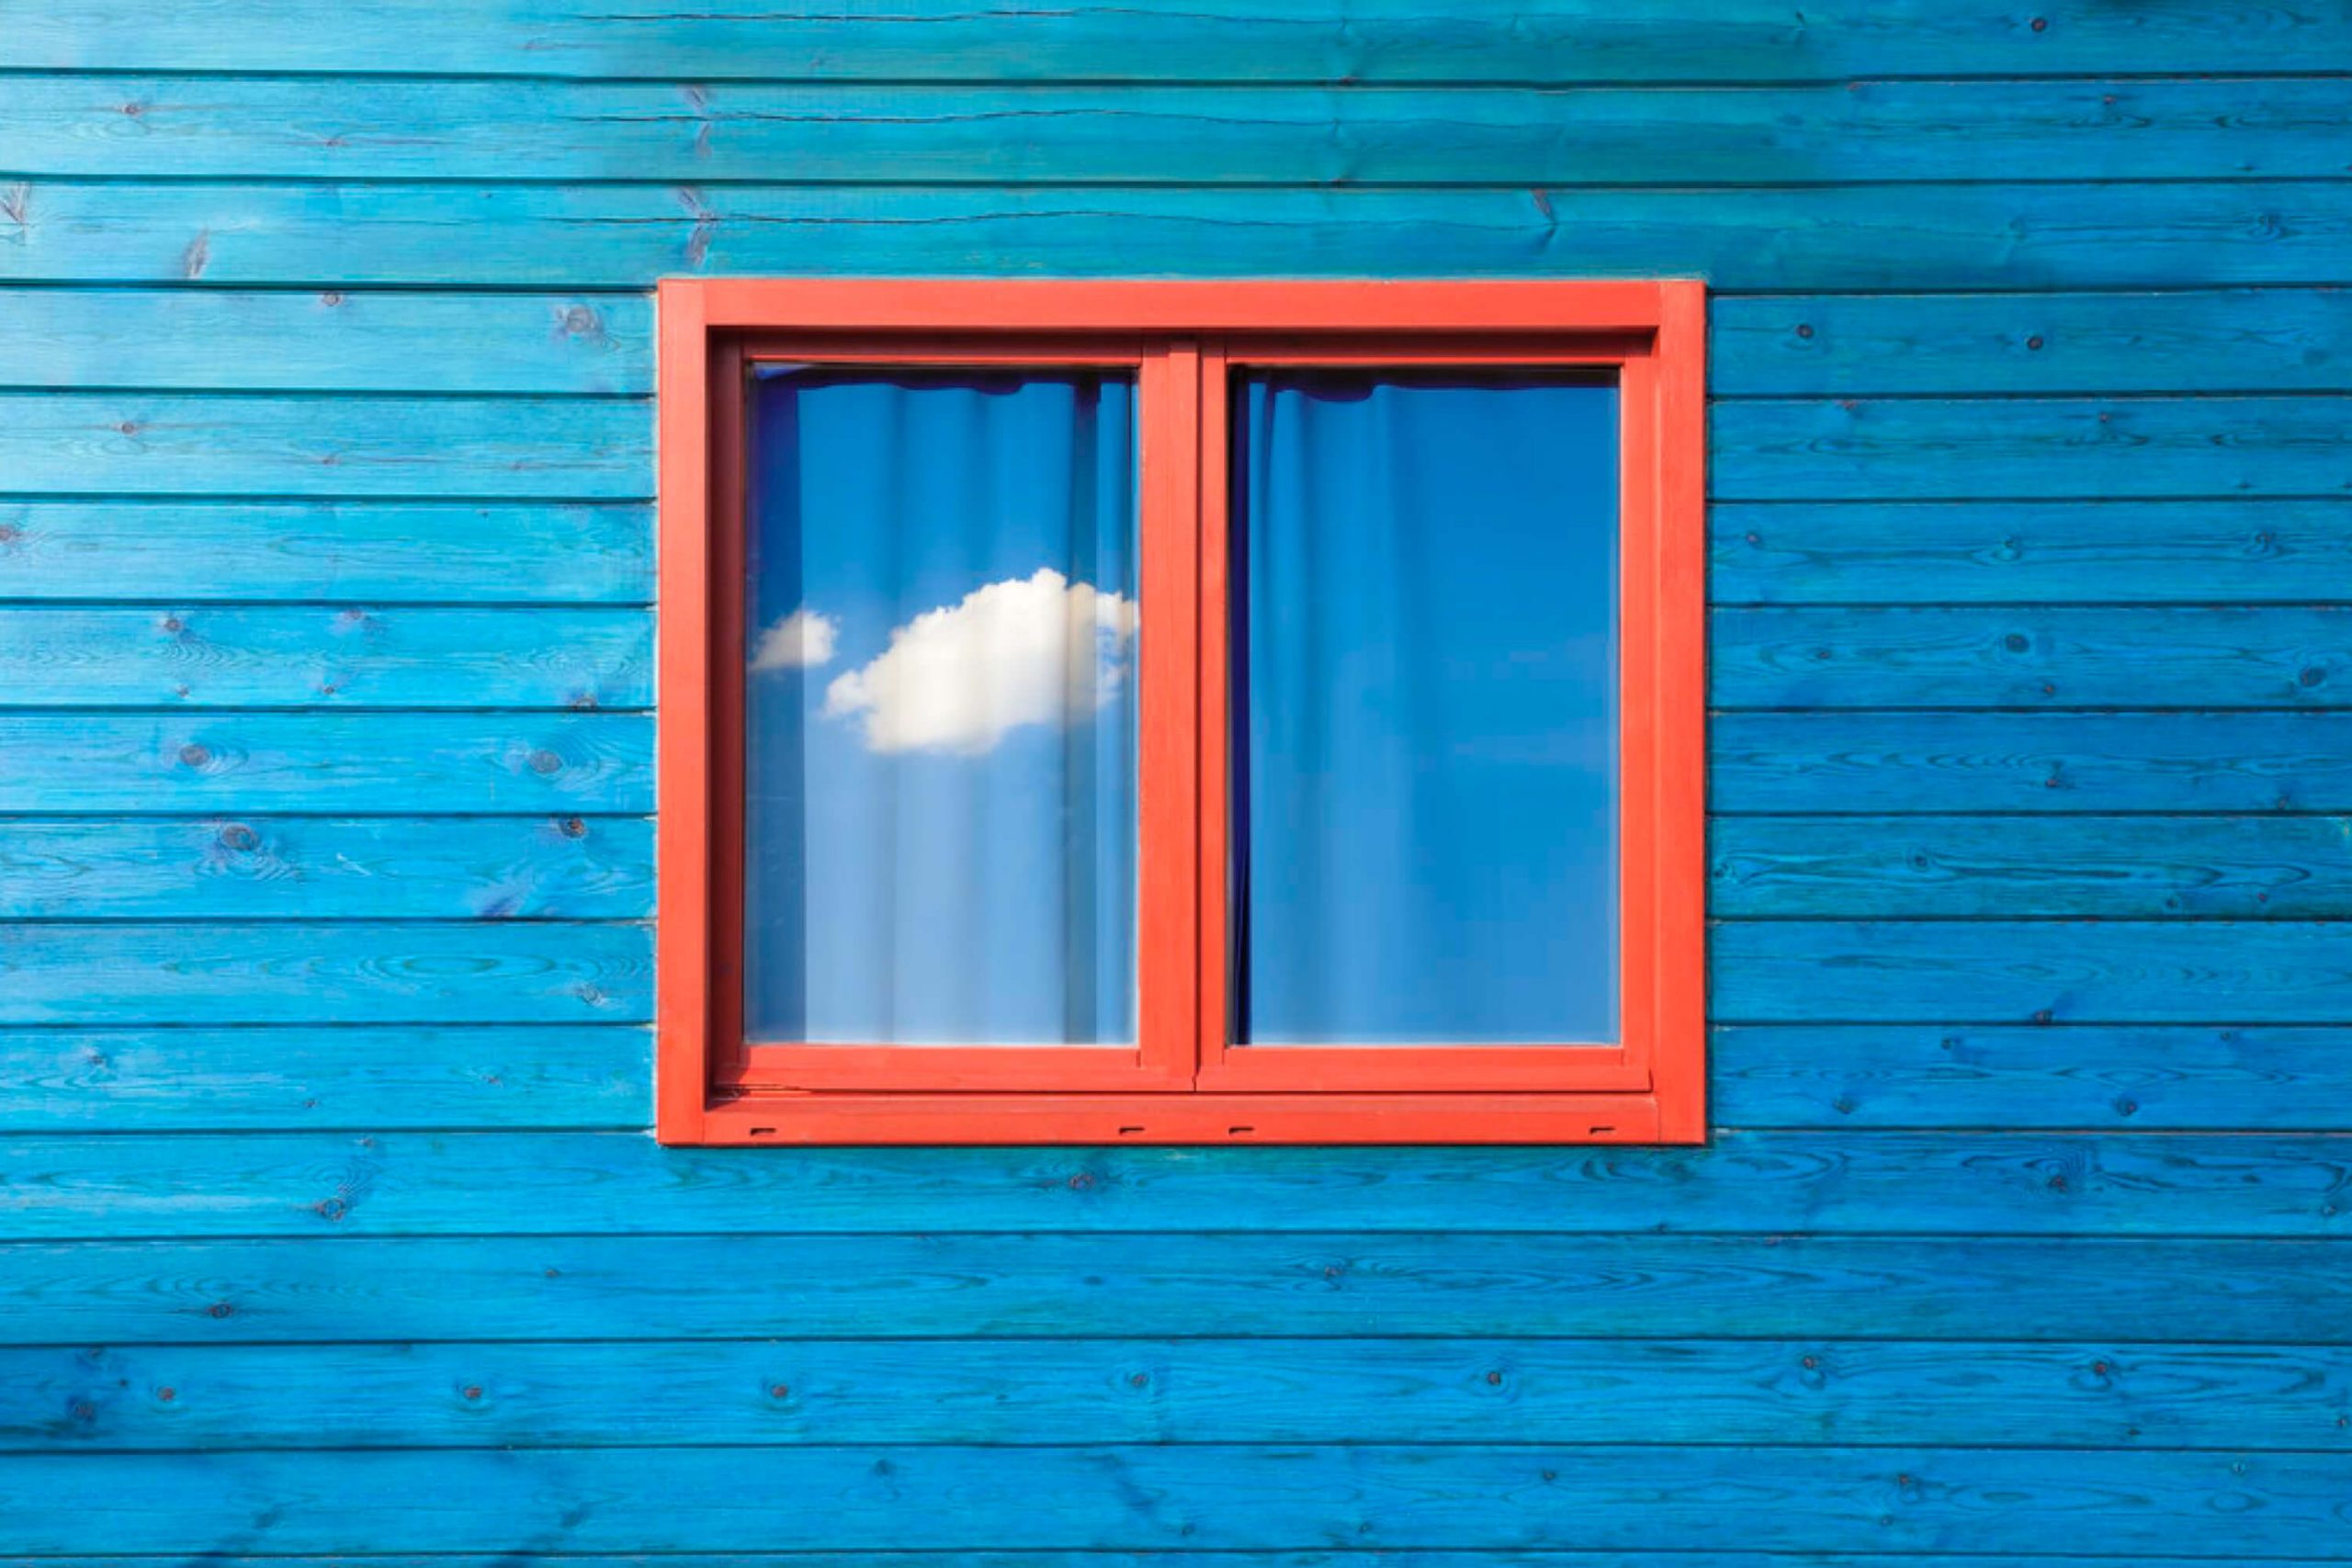 How to Paint Glass Windows